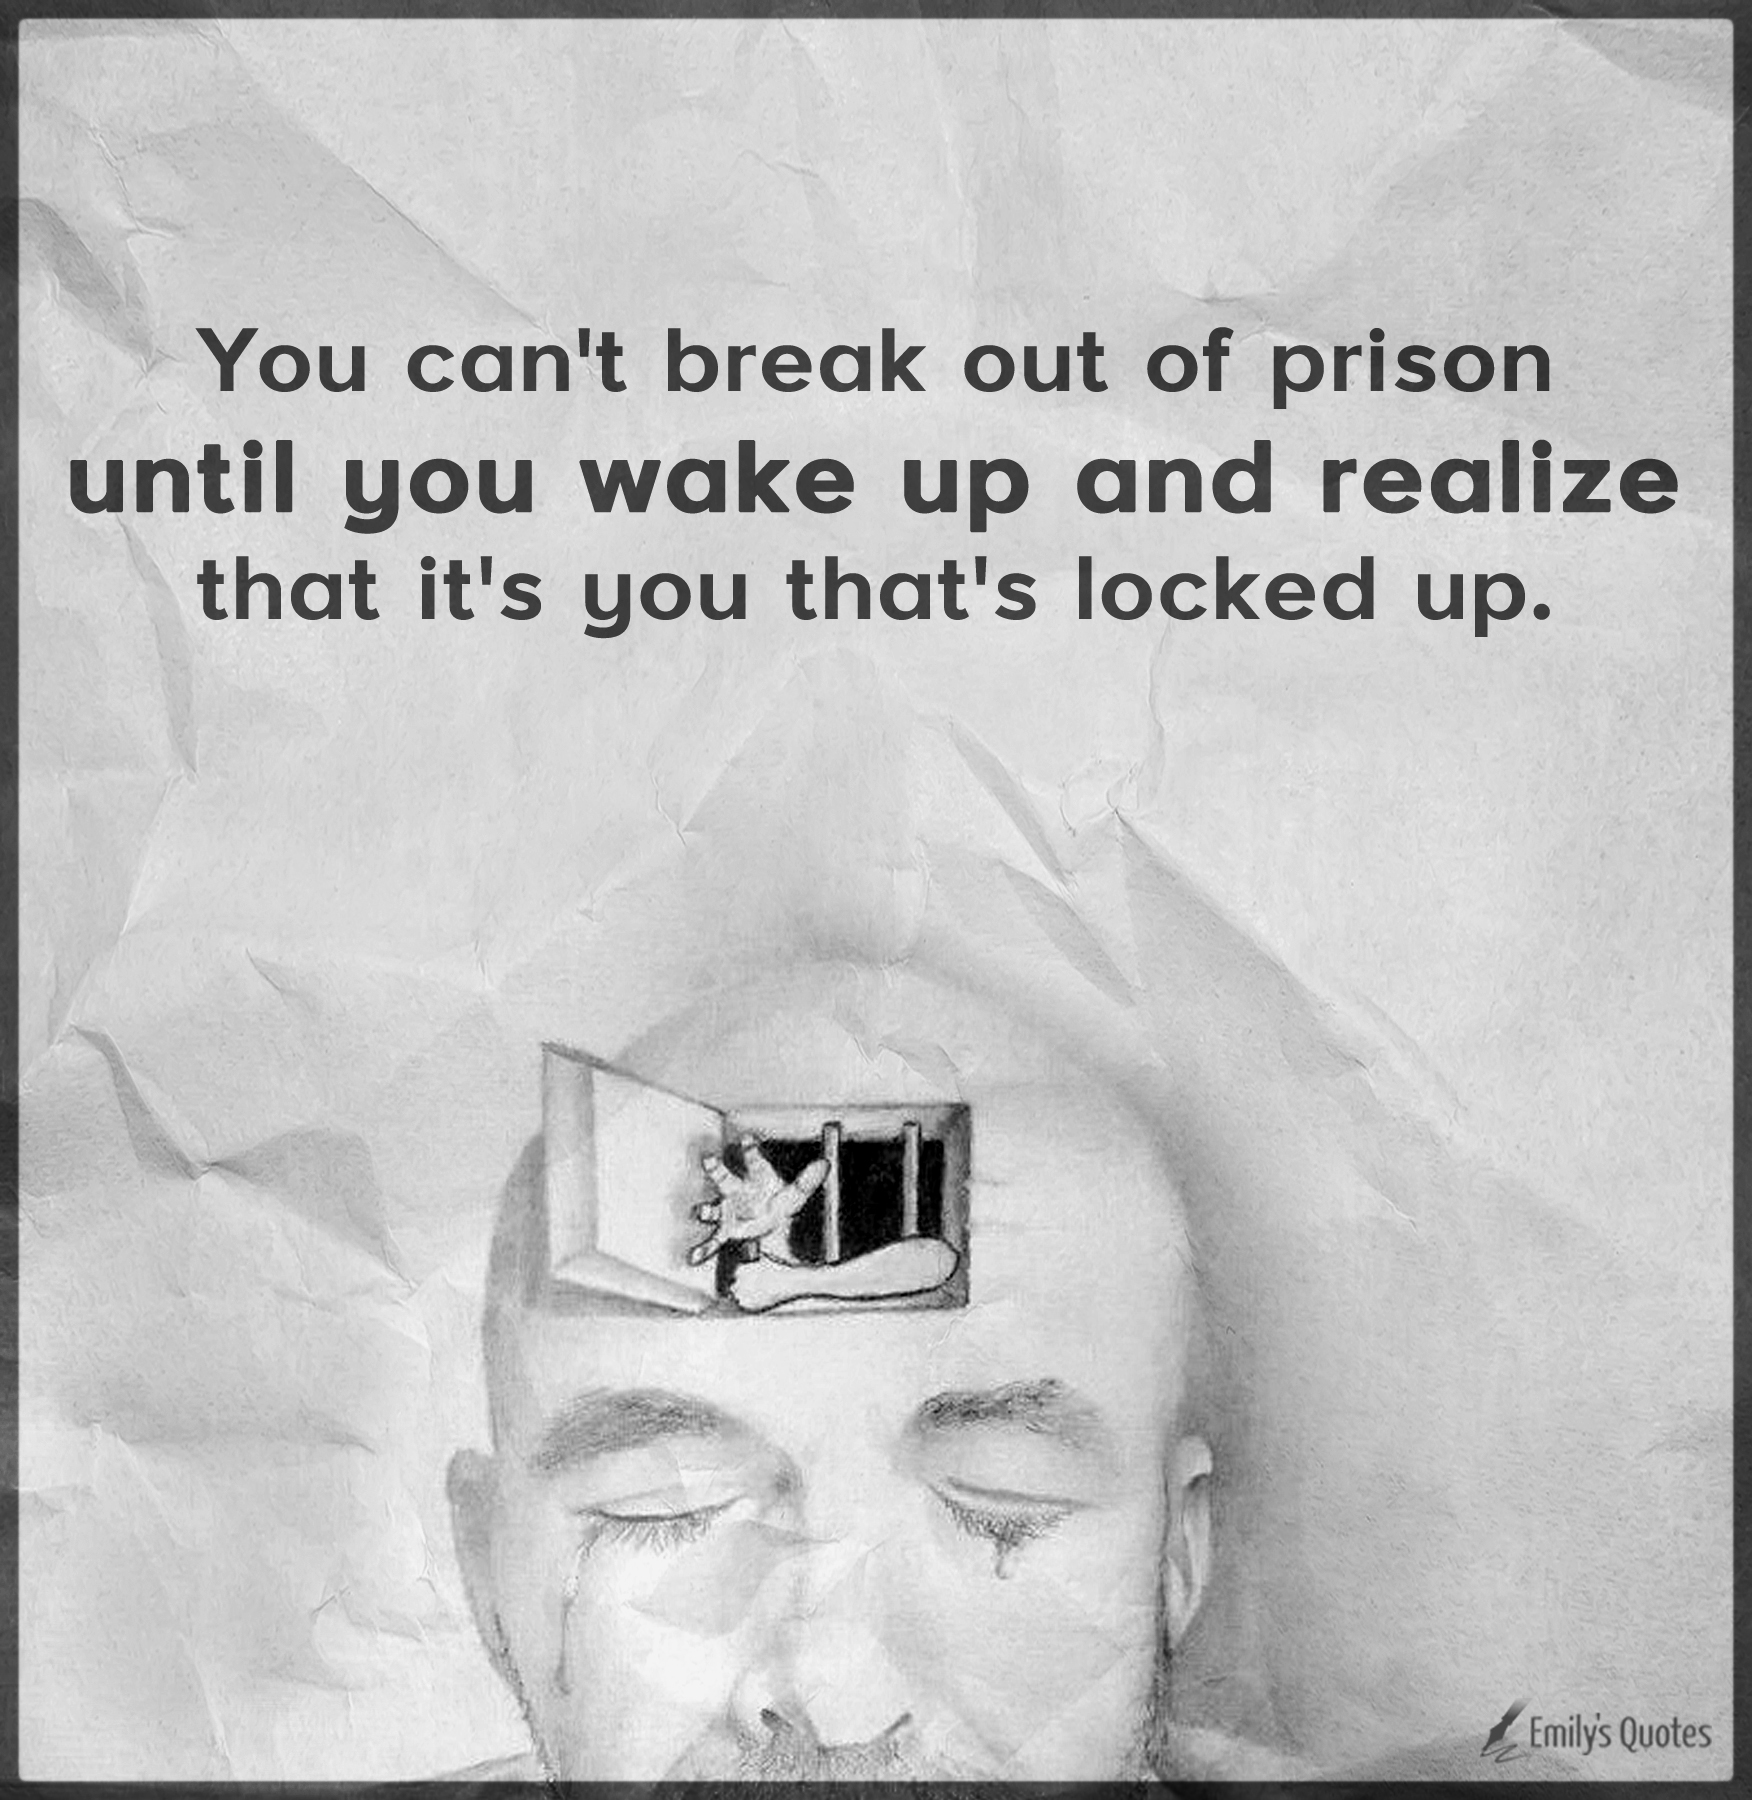 You can't break out of prison until you wake up and realize that it's